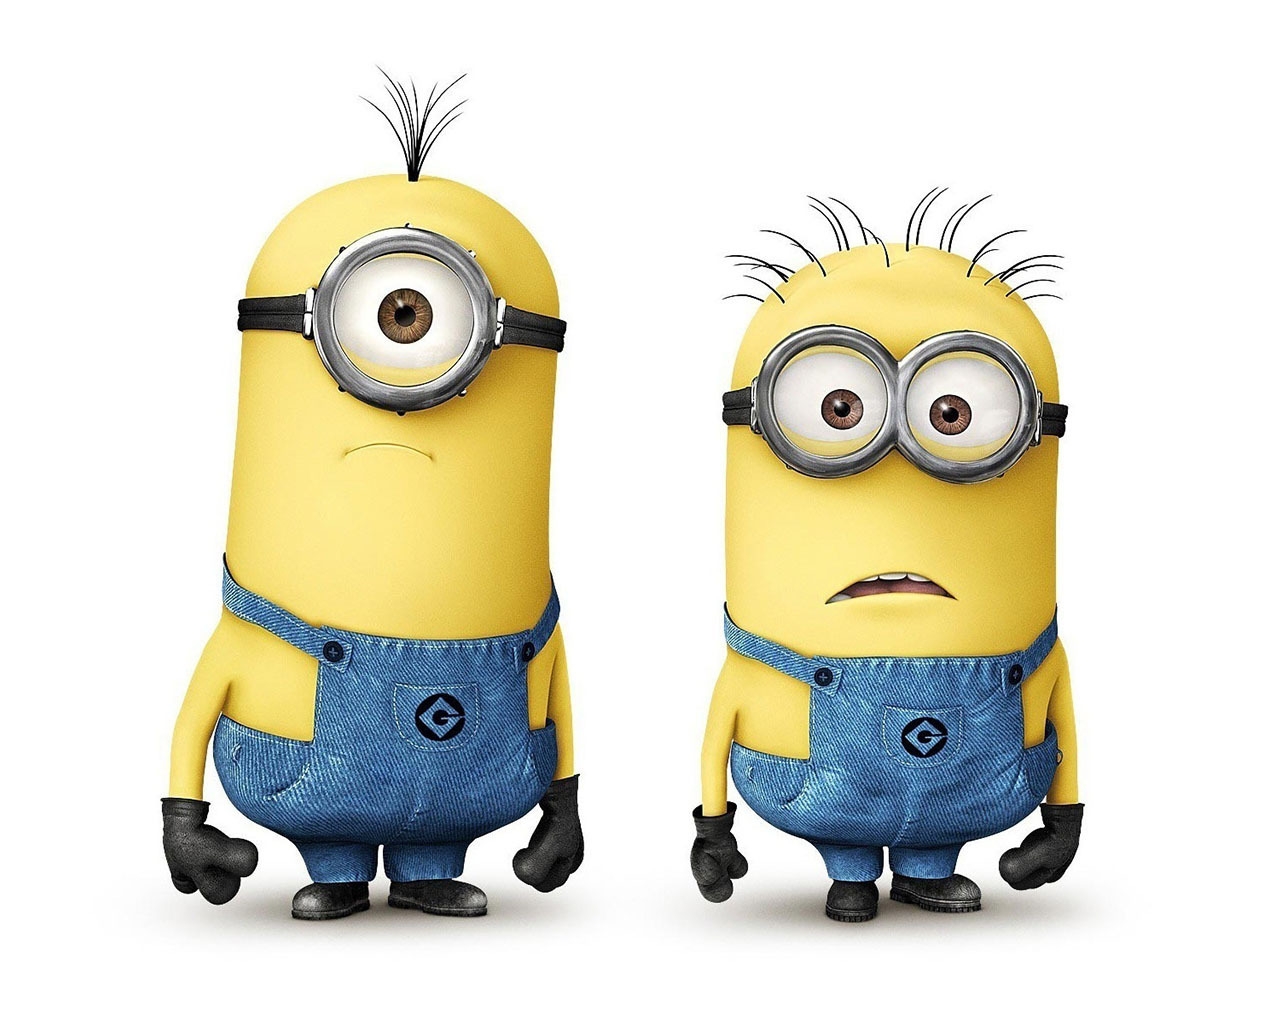 2013 Despicable Me 2 for 1280 x 1024 resolution